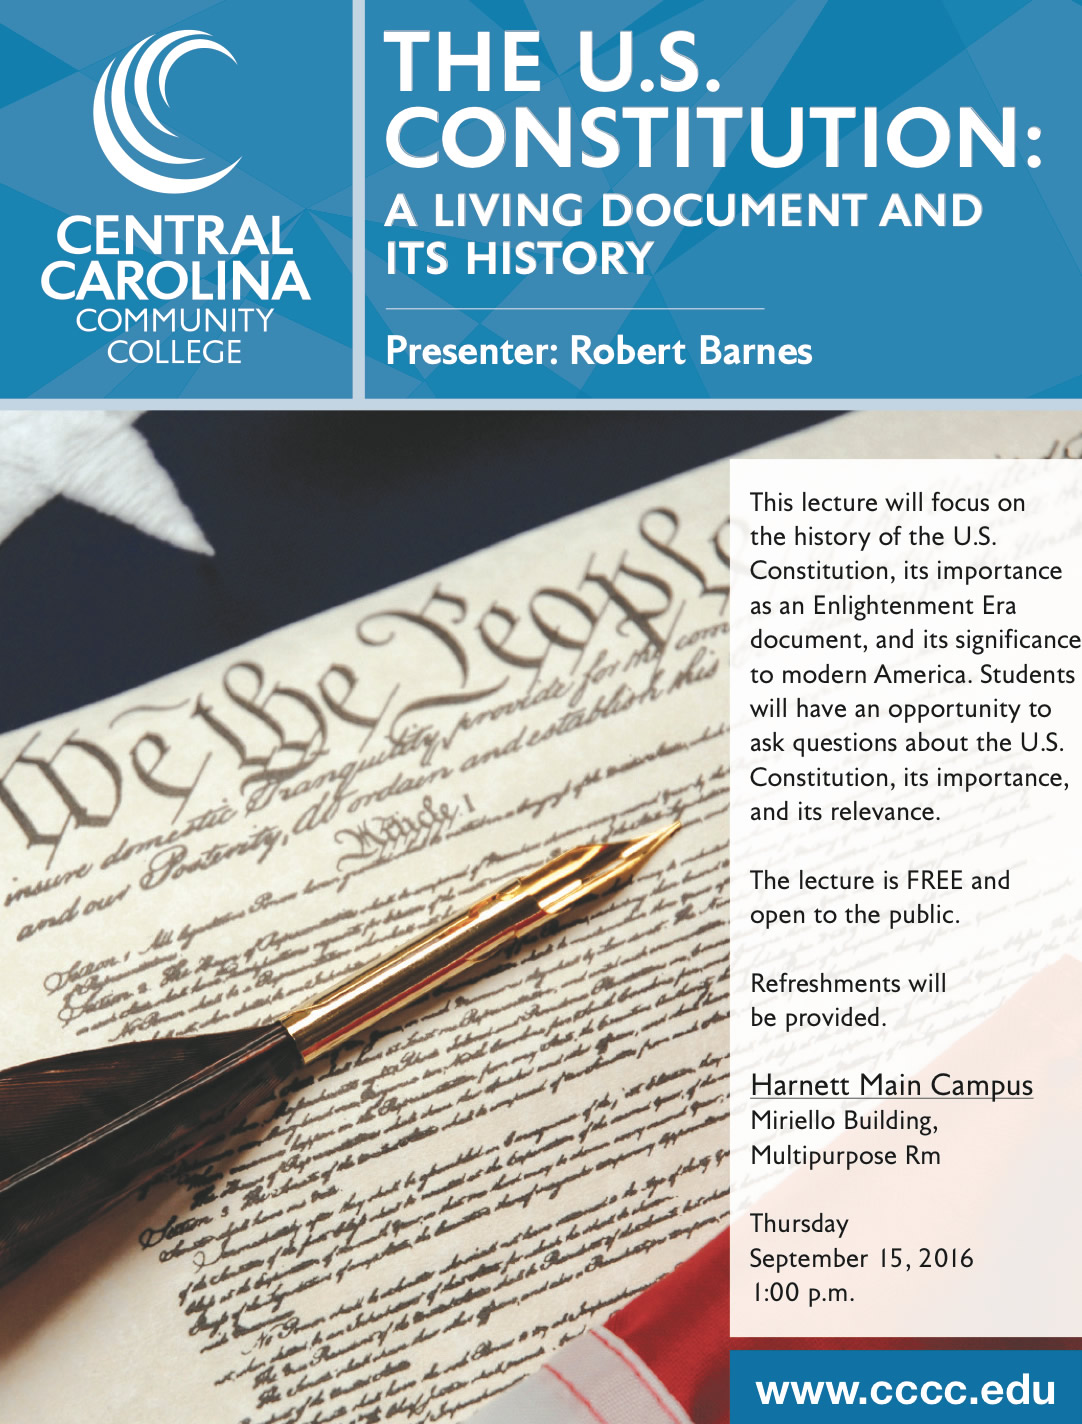 Constitution lecture will take place at CCCC Harnett Main Campus